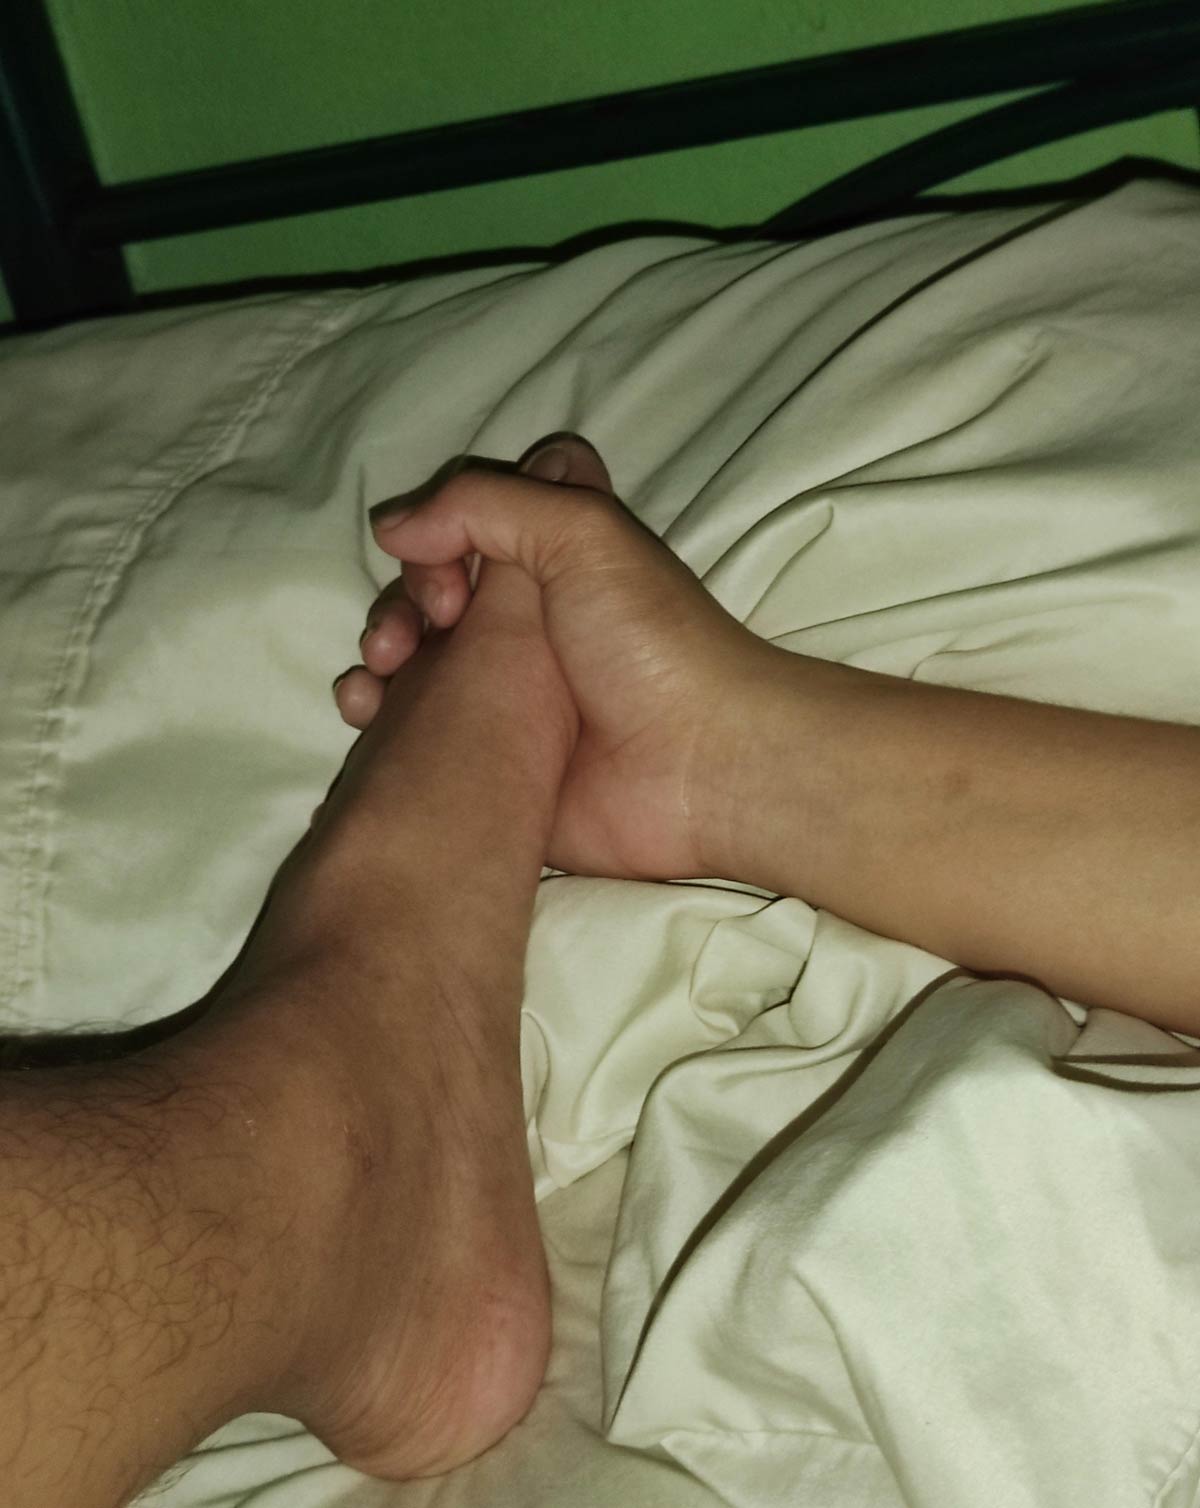 Wife has a habit of holding my hand when she's asleep. I rotated to the other end of the bed so I can watch anime on my phone and not wake her up and this is what happened last night